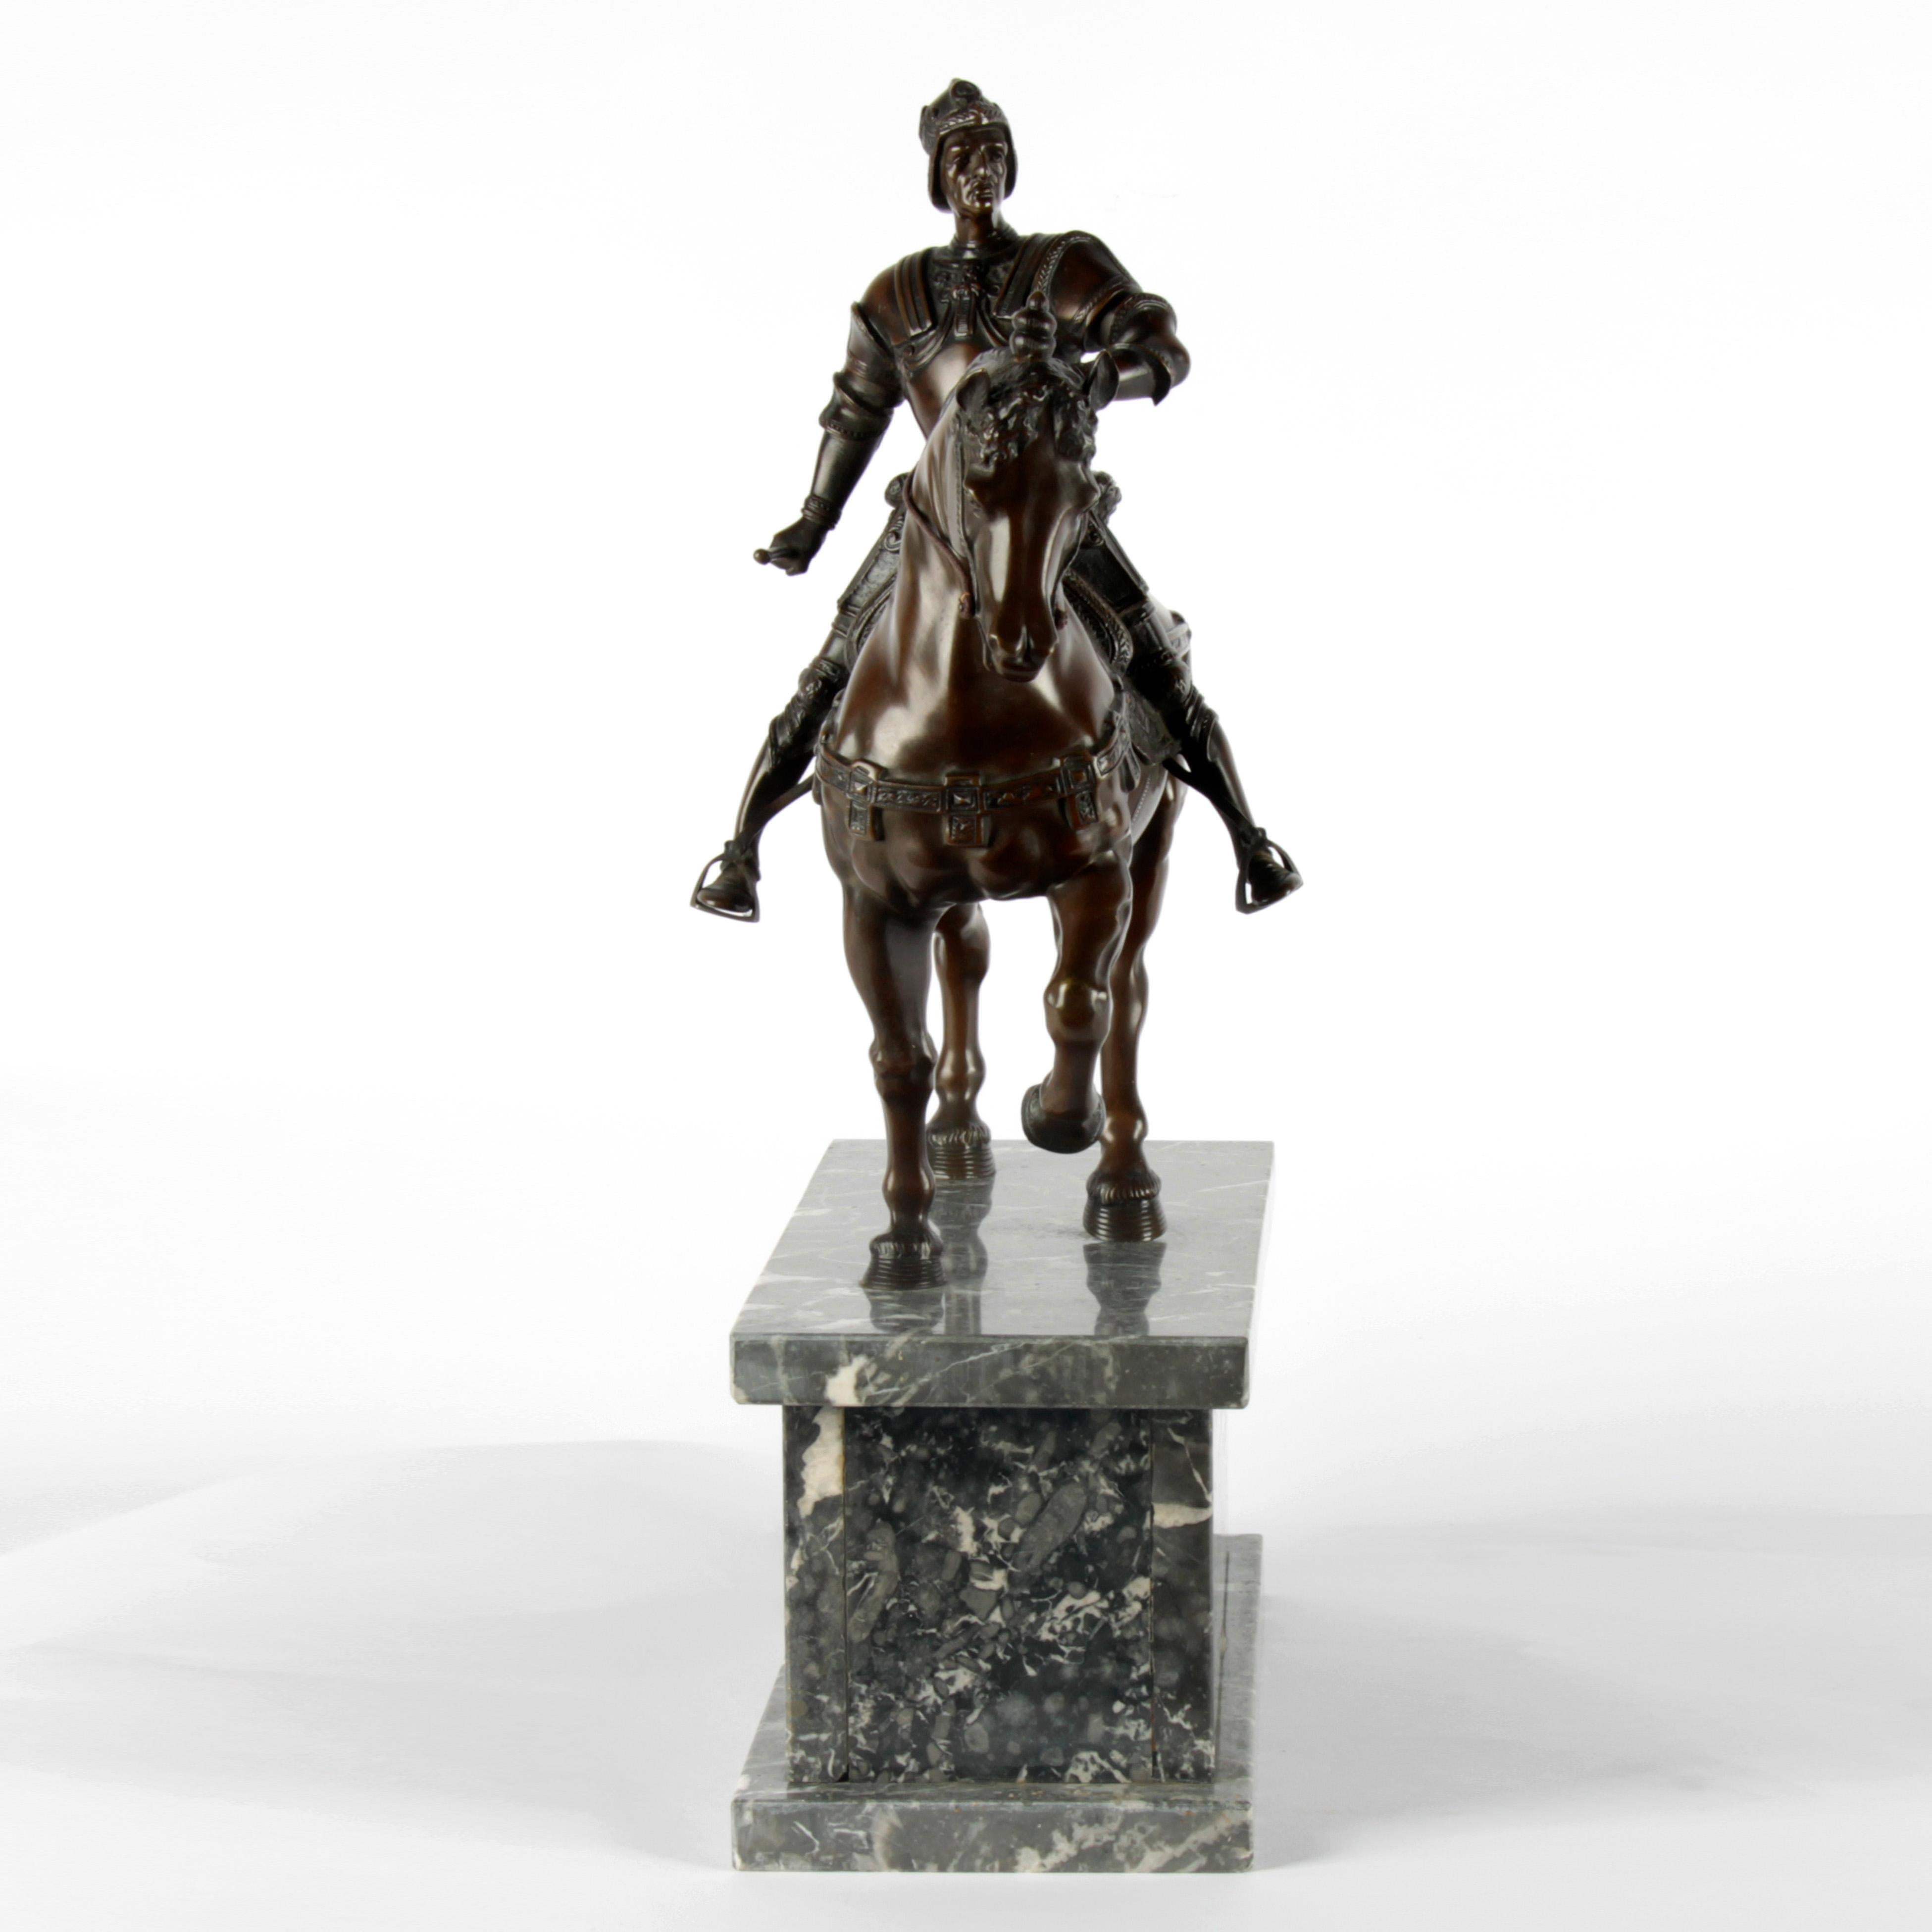 This patinated bronze statue is after the original Renaissance sculpture which was executed by Andrea del Verrocchio in 1480–1488, in Italy. Exactly as in the original, it portrays the commander Bartolomeo Colleoni, who served for a long time under